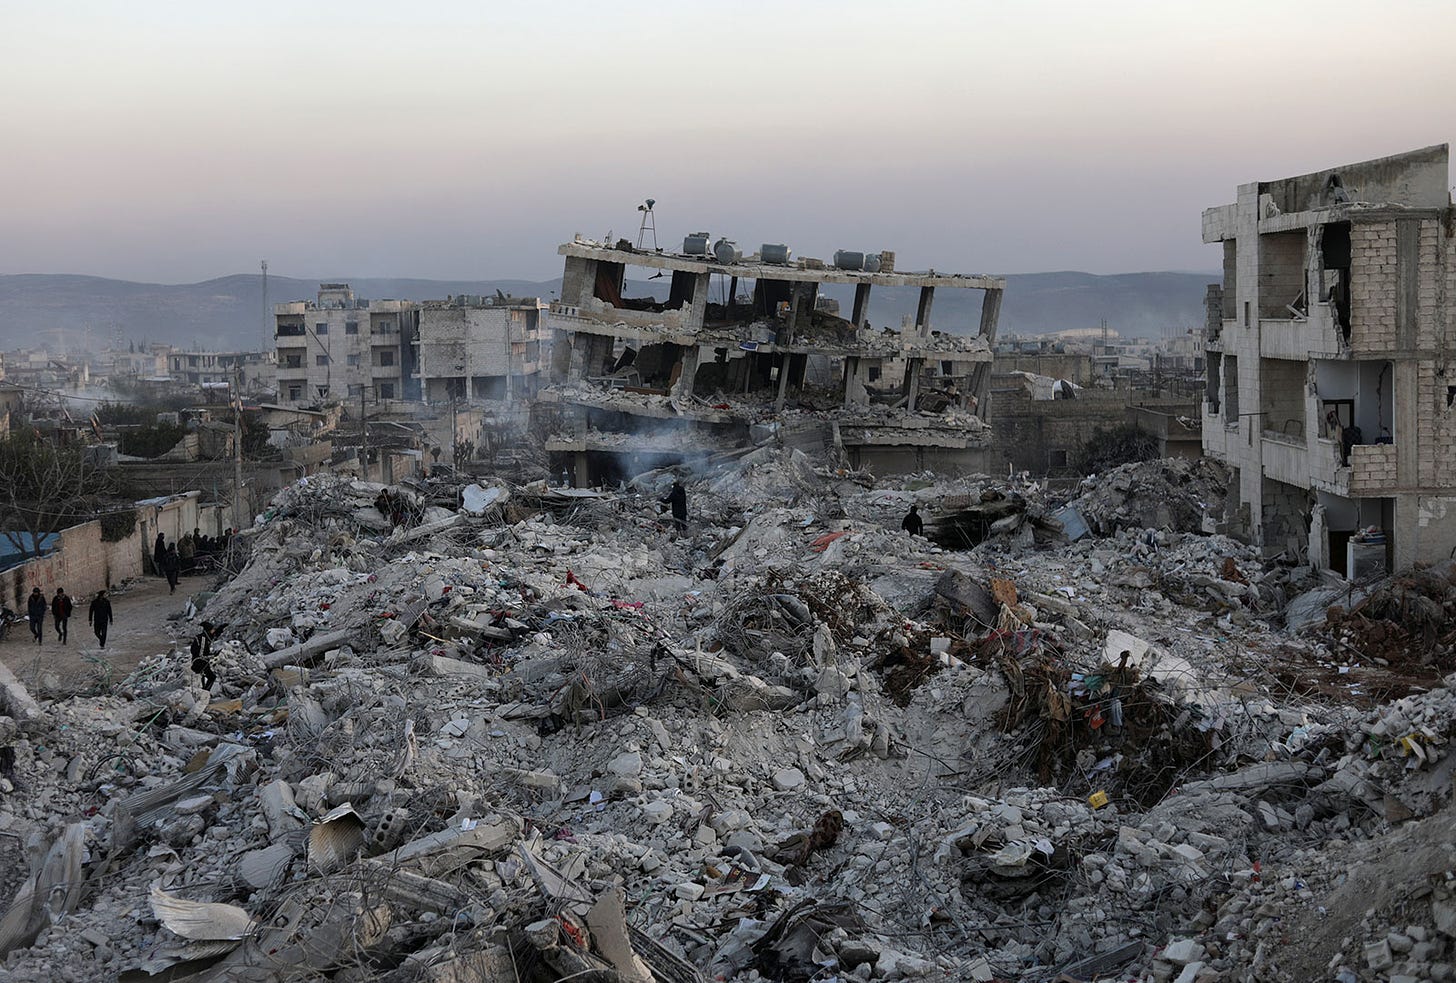 A view shows the aftermath of the earthquake in Jandaris, Syria, on February 9. 